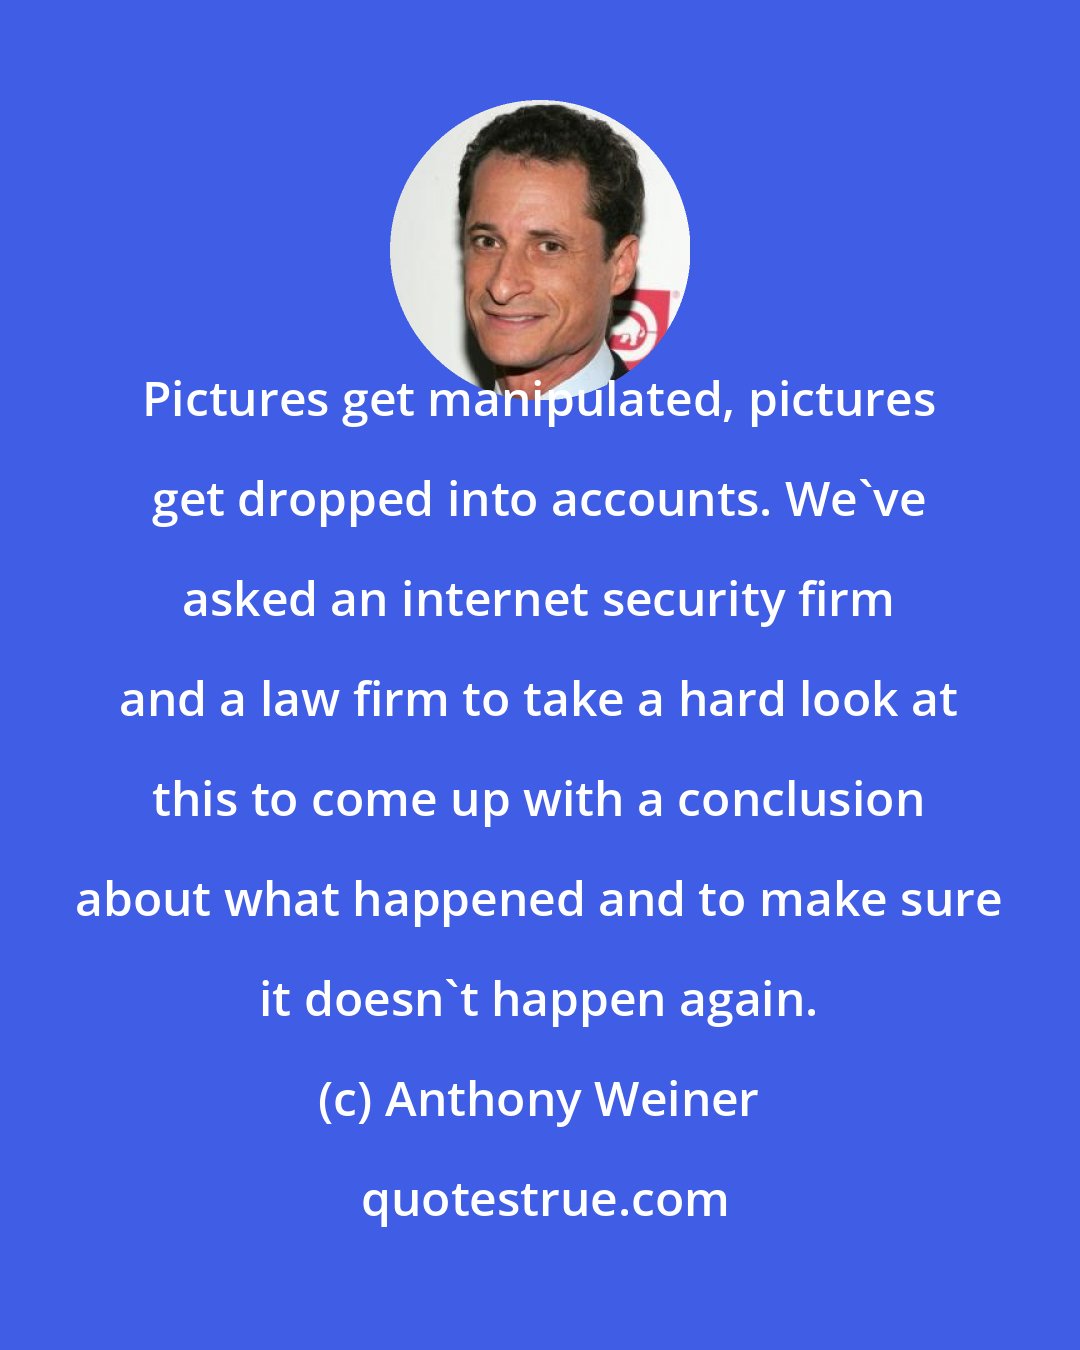 Anthony Weiner: Pictures get manipulated, pictures get dropped into accounts. We've asked an internet security firm and a law firm to take a hard look at this to come up with a conclusion about what happened and to make sure it doesn't happen again.